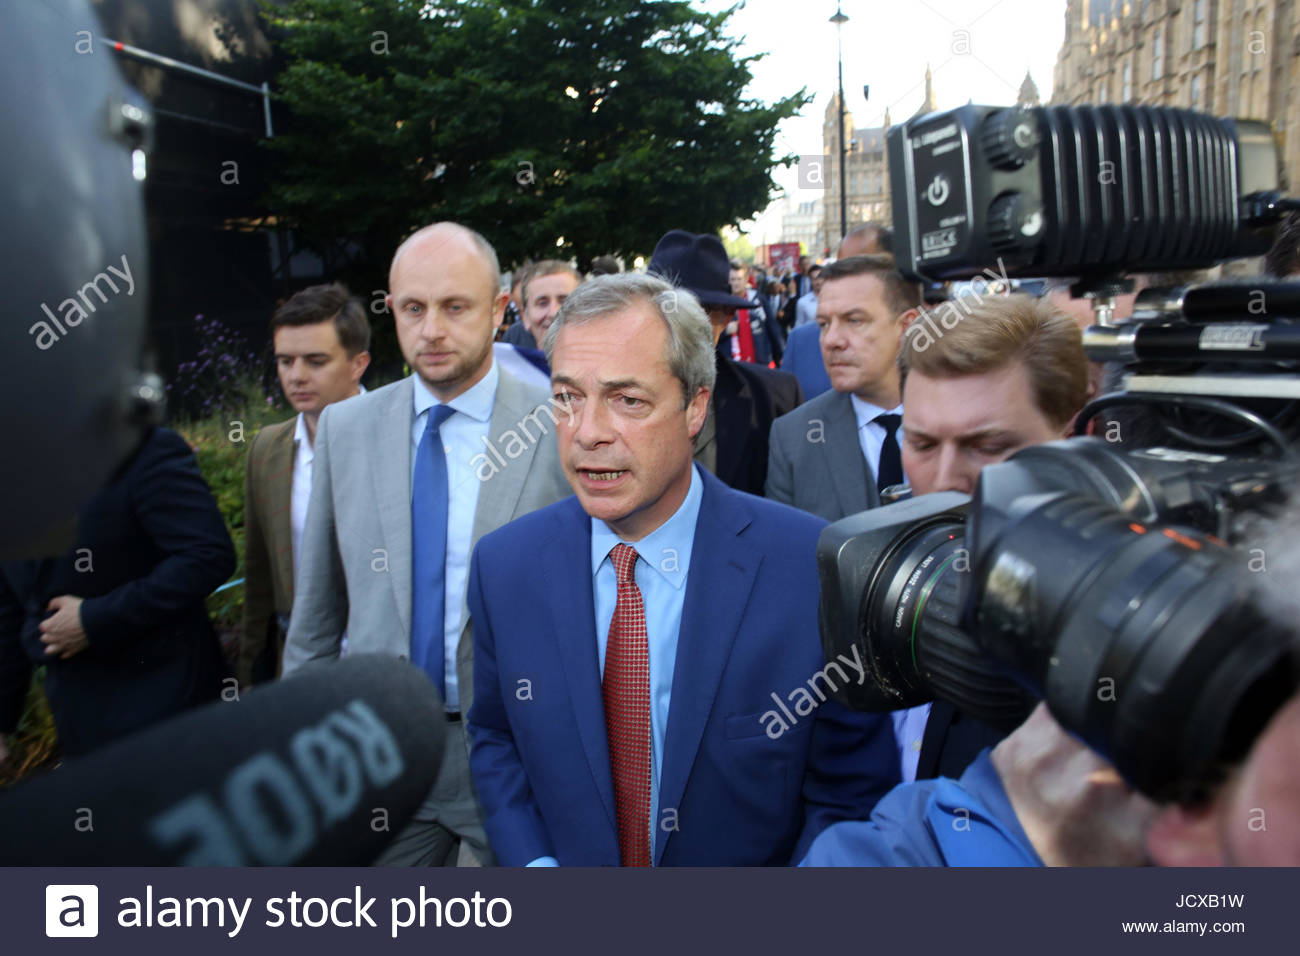 Nigel Farage speaking to the media at Westminster after the Referendum result. Credit: reallifephotos/Alamy Stock Photo